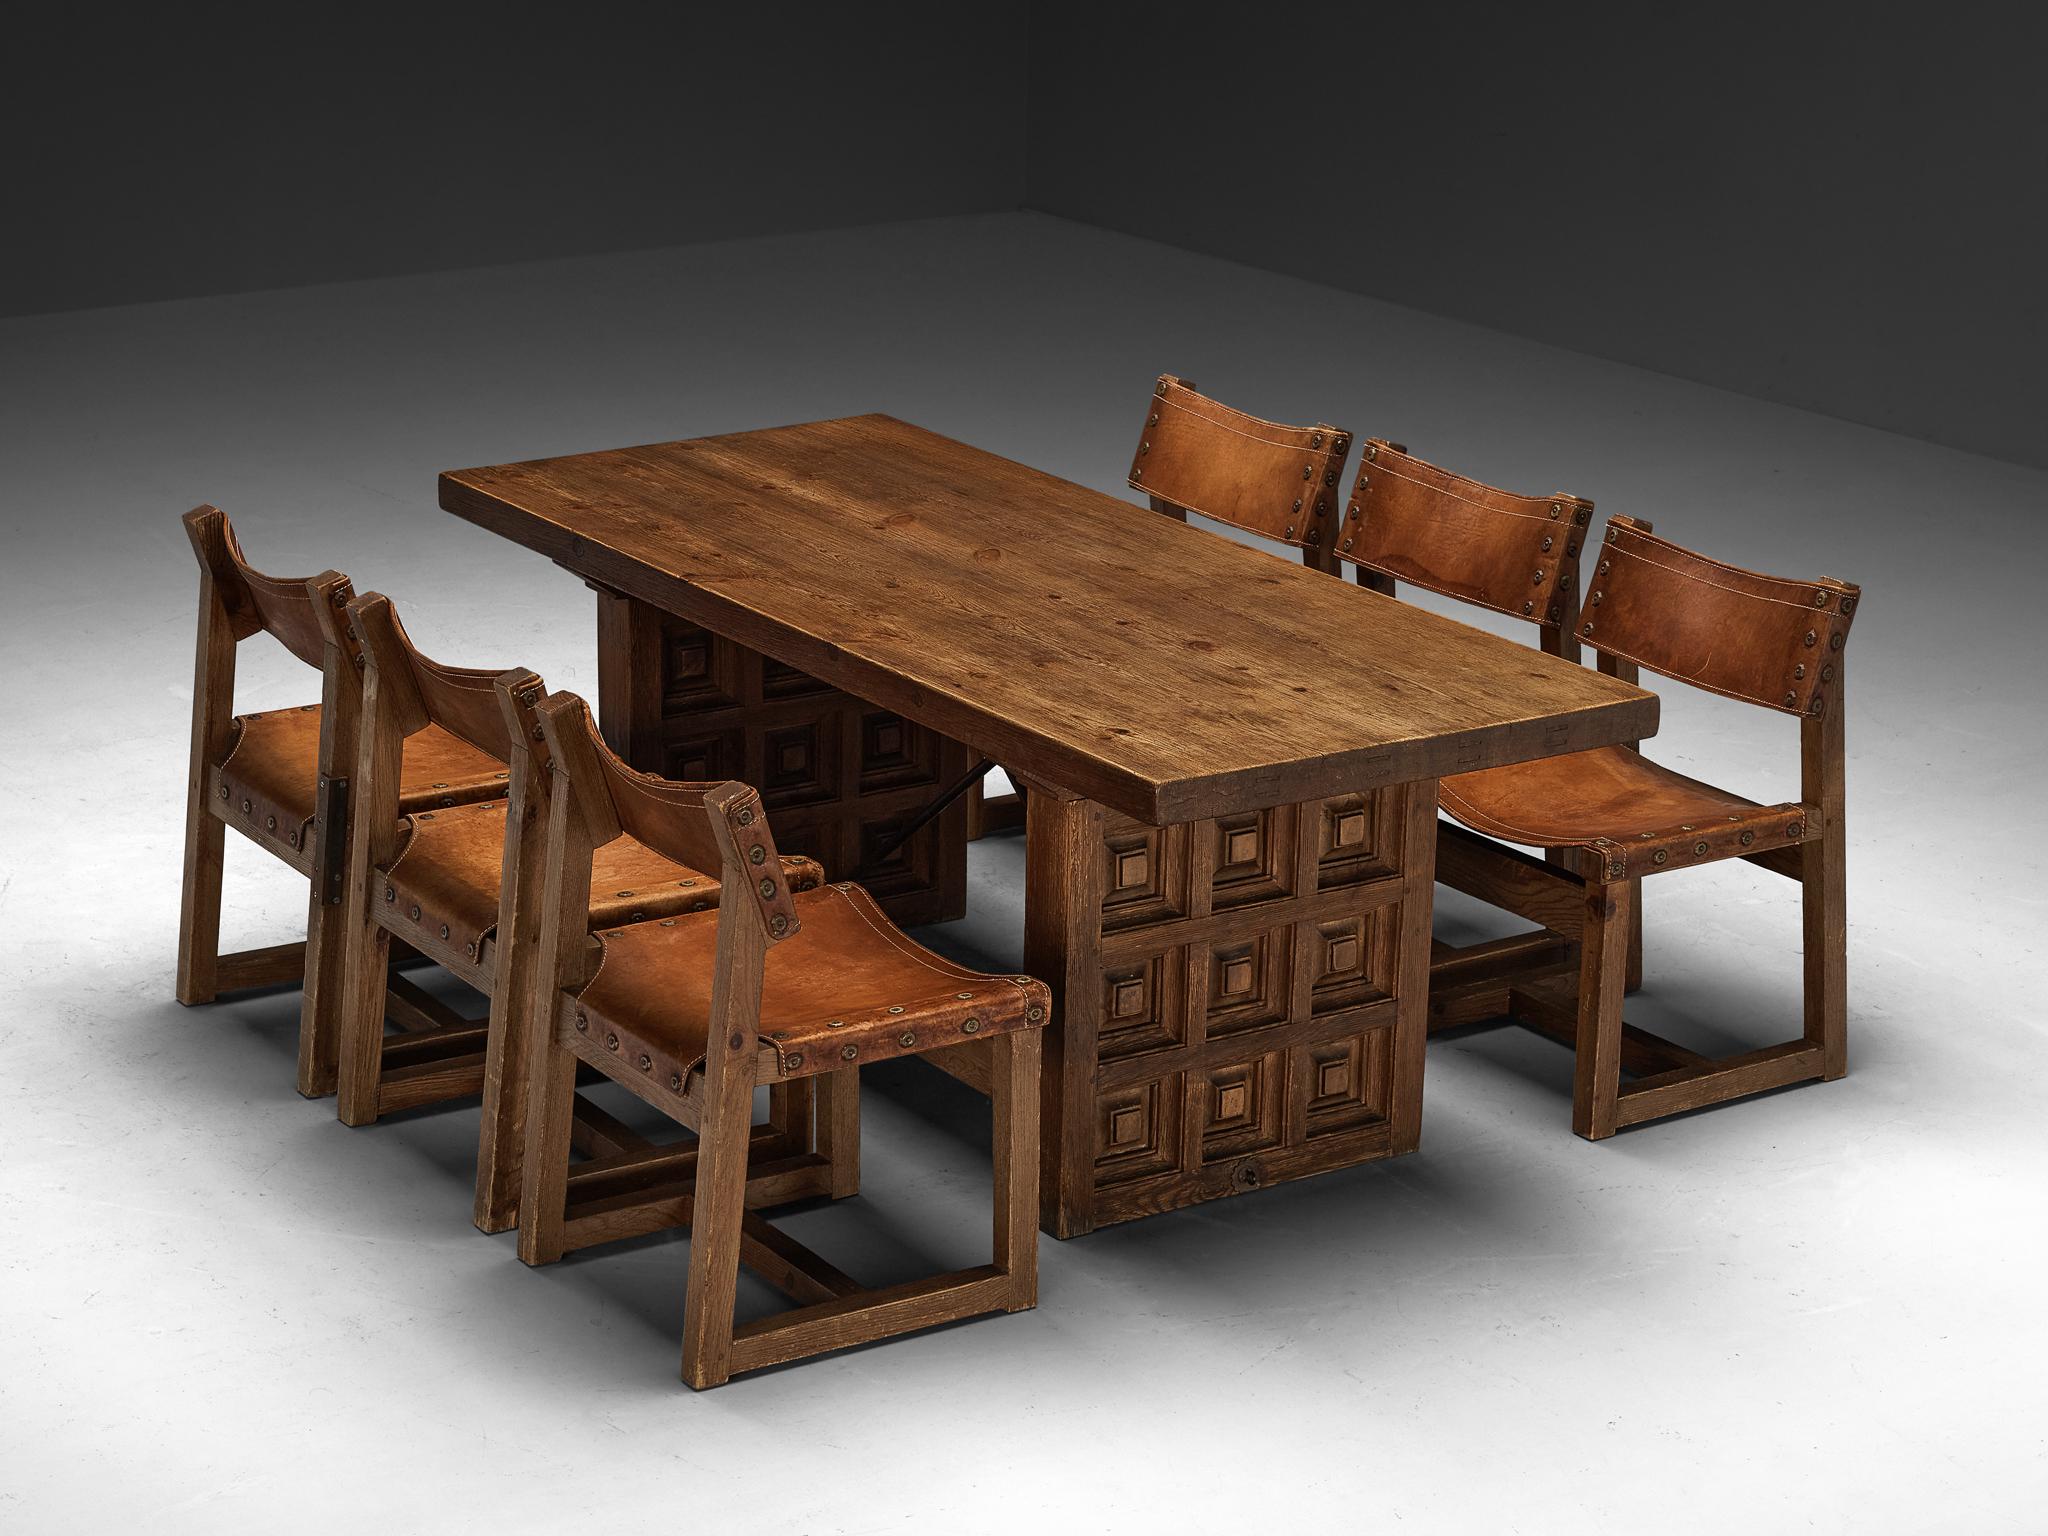 Dining room set made by Biosca containing a dining table and six chairs

Biosca, dining table, stained pine, iron, Spain, 1960s

Outstanding Spanish dining table that is executed by Biosca in an architectural way. The two bases feature a geometrical